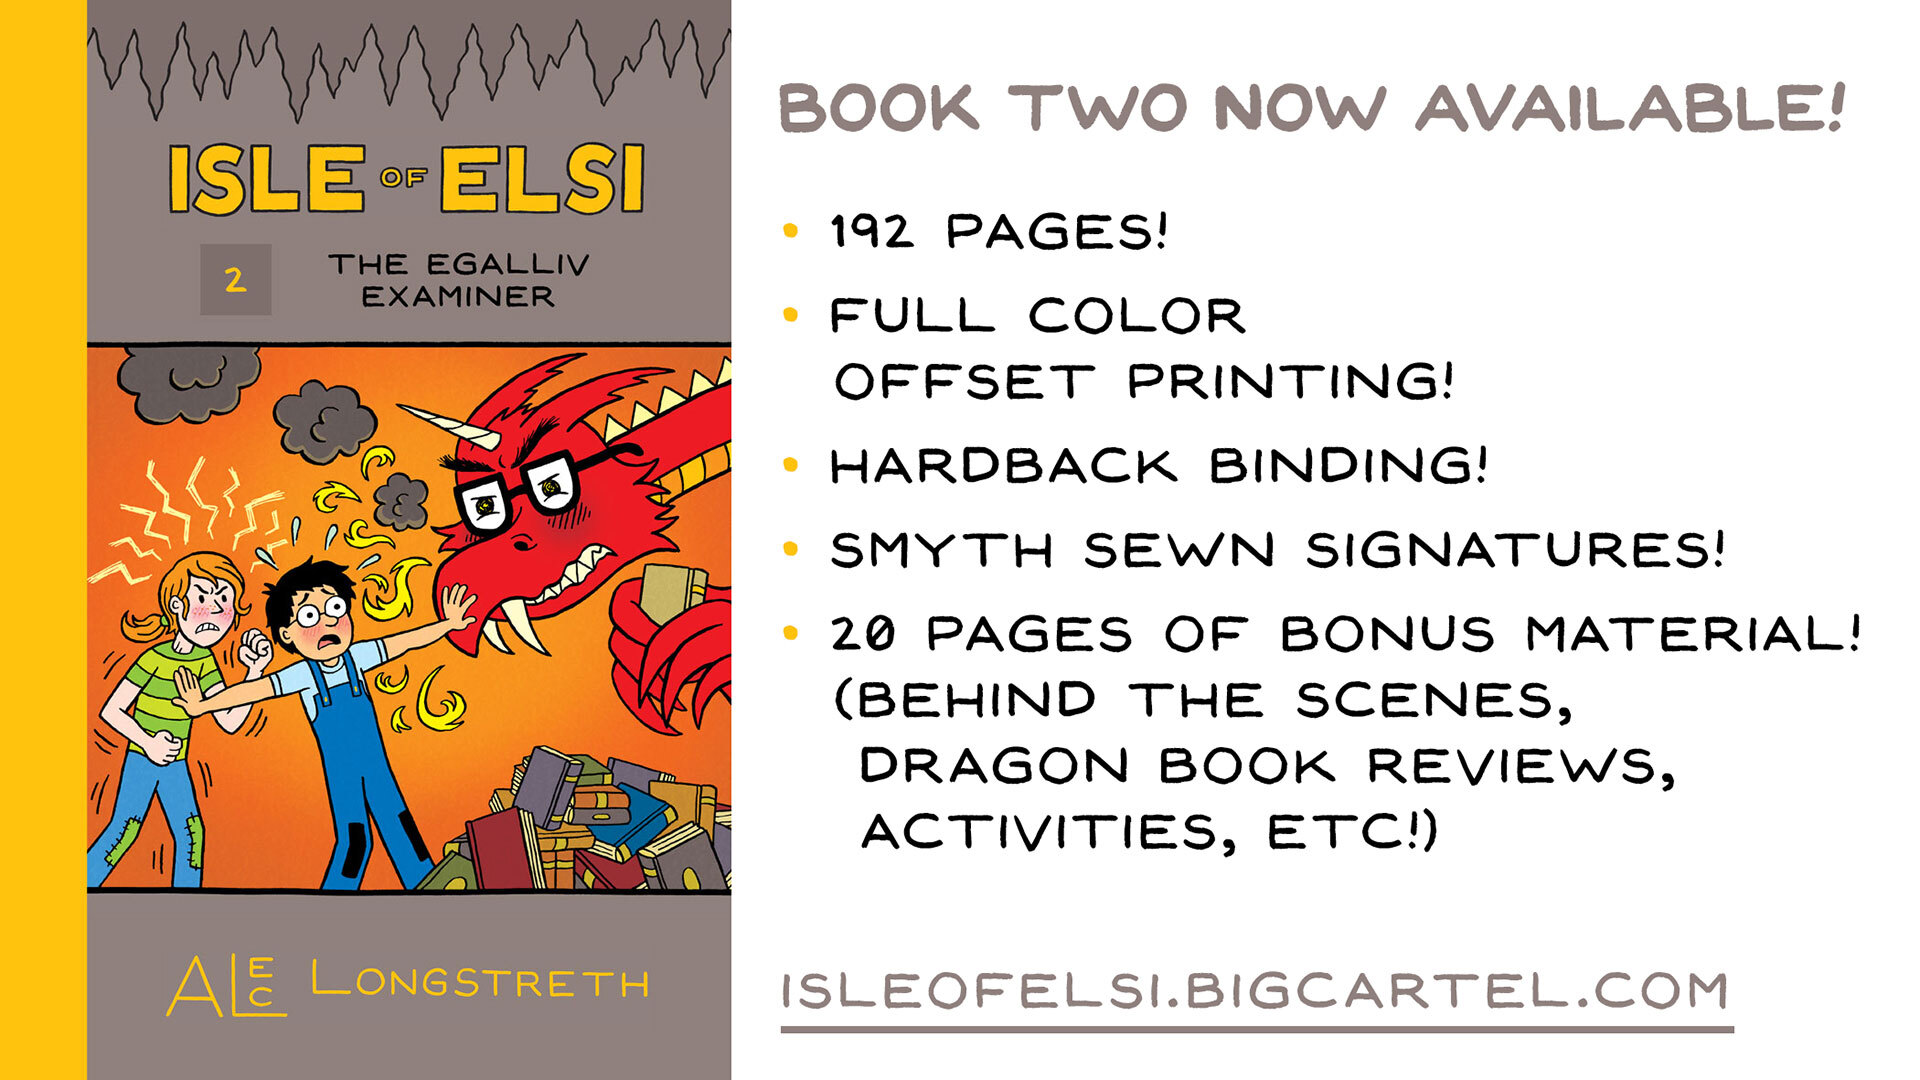 Isle of Elsi Book Two cover and print specifications